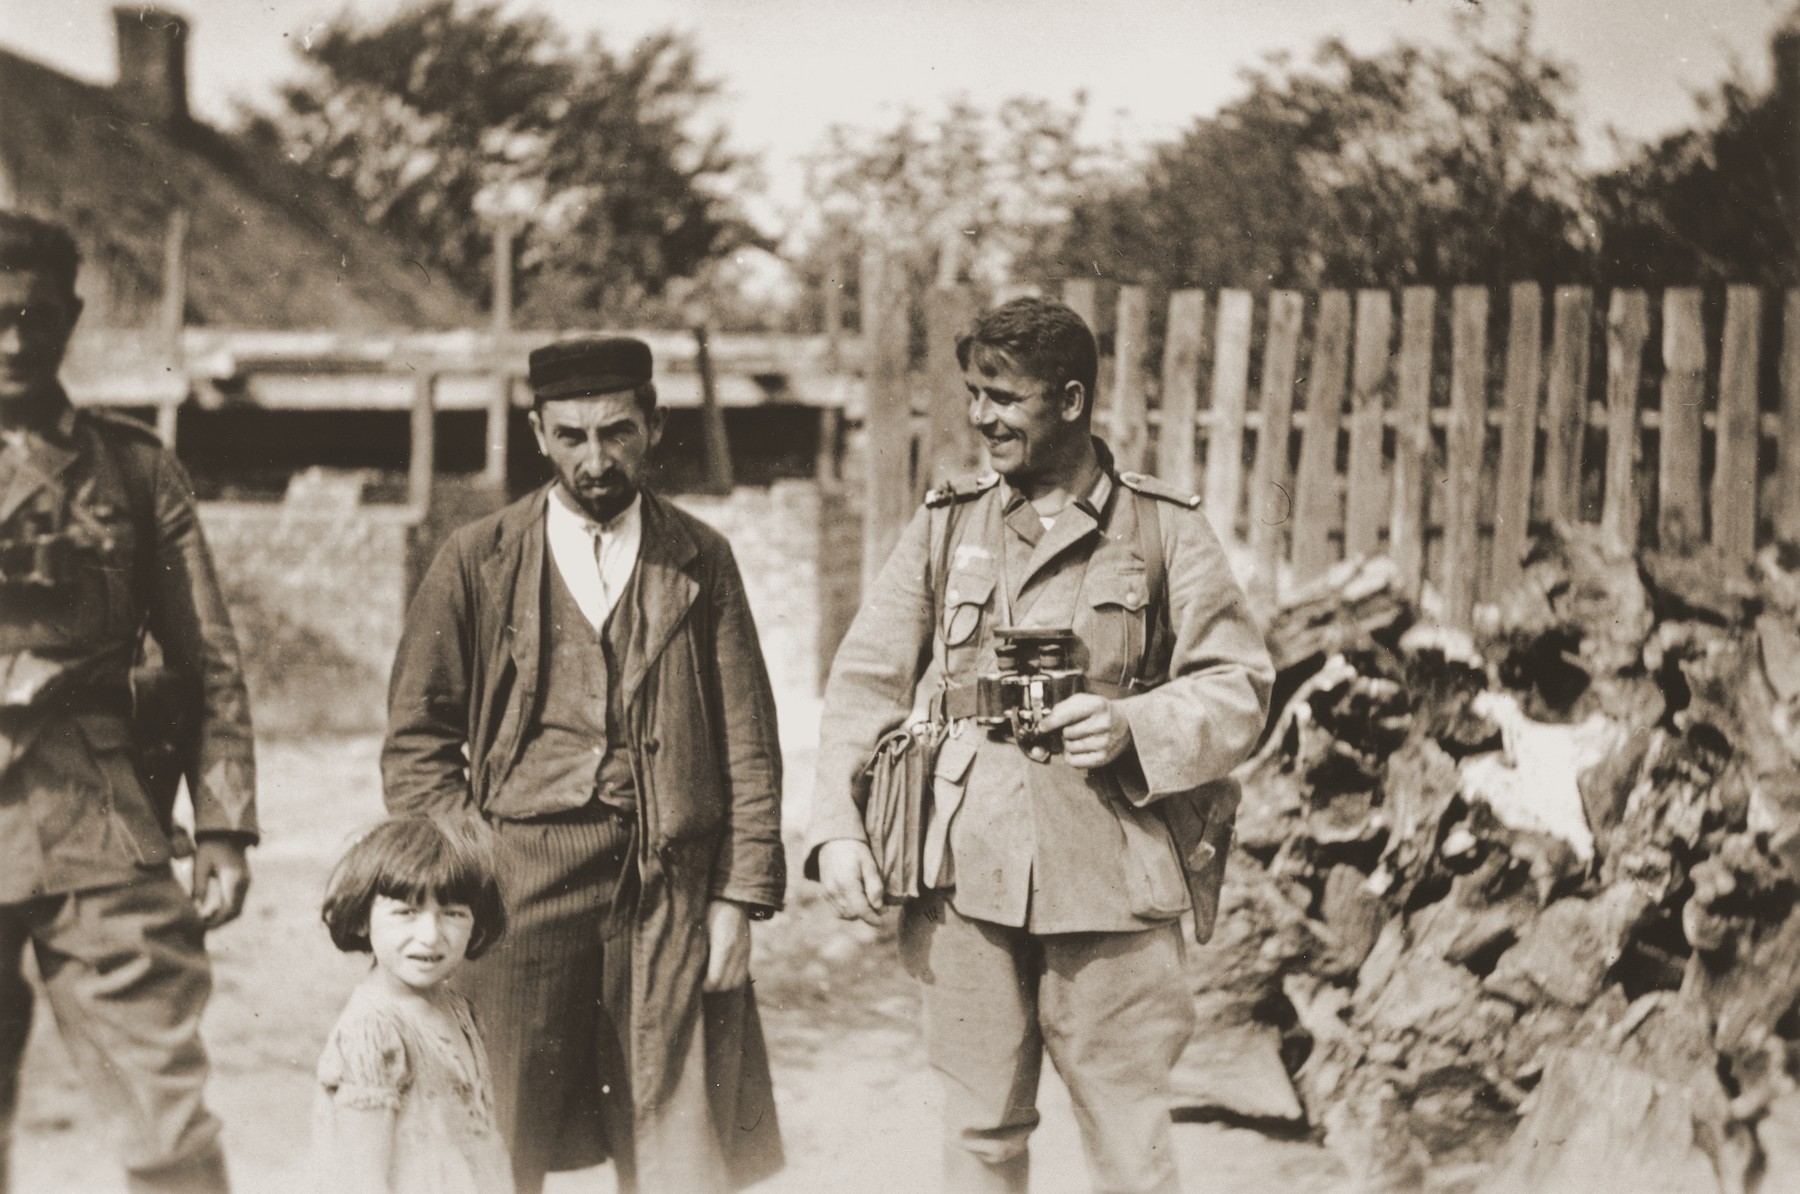 A German soldier with a binoculars laughs at a Polish Jew, who stands with his young daughter. 

One photograph from an album belonging to a member of a Wehrmacht machine gunners' unit, which was found after the war by Lorenzo Hawkins (the donor's grandfather), an American serviceman in Company B, 56th Armored Engineer Battalion.